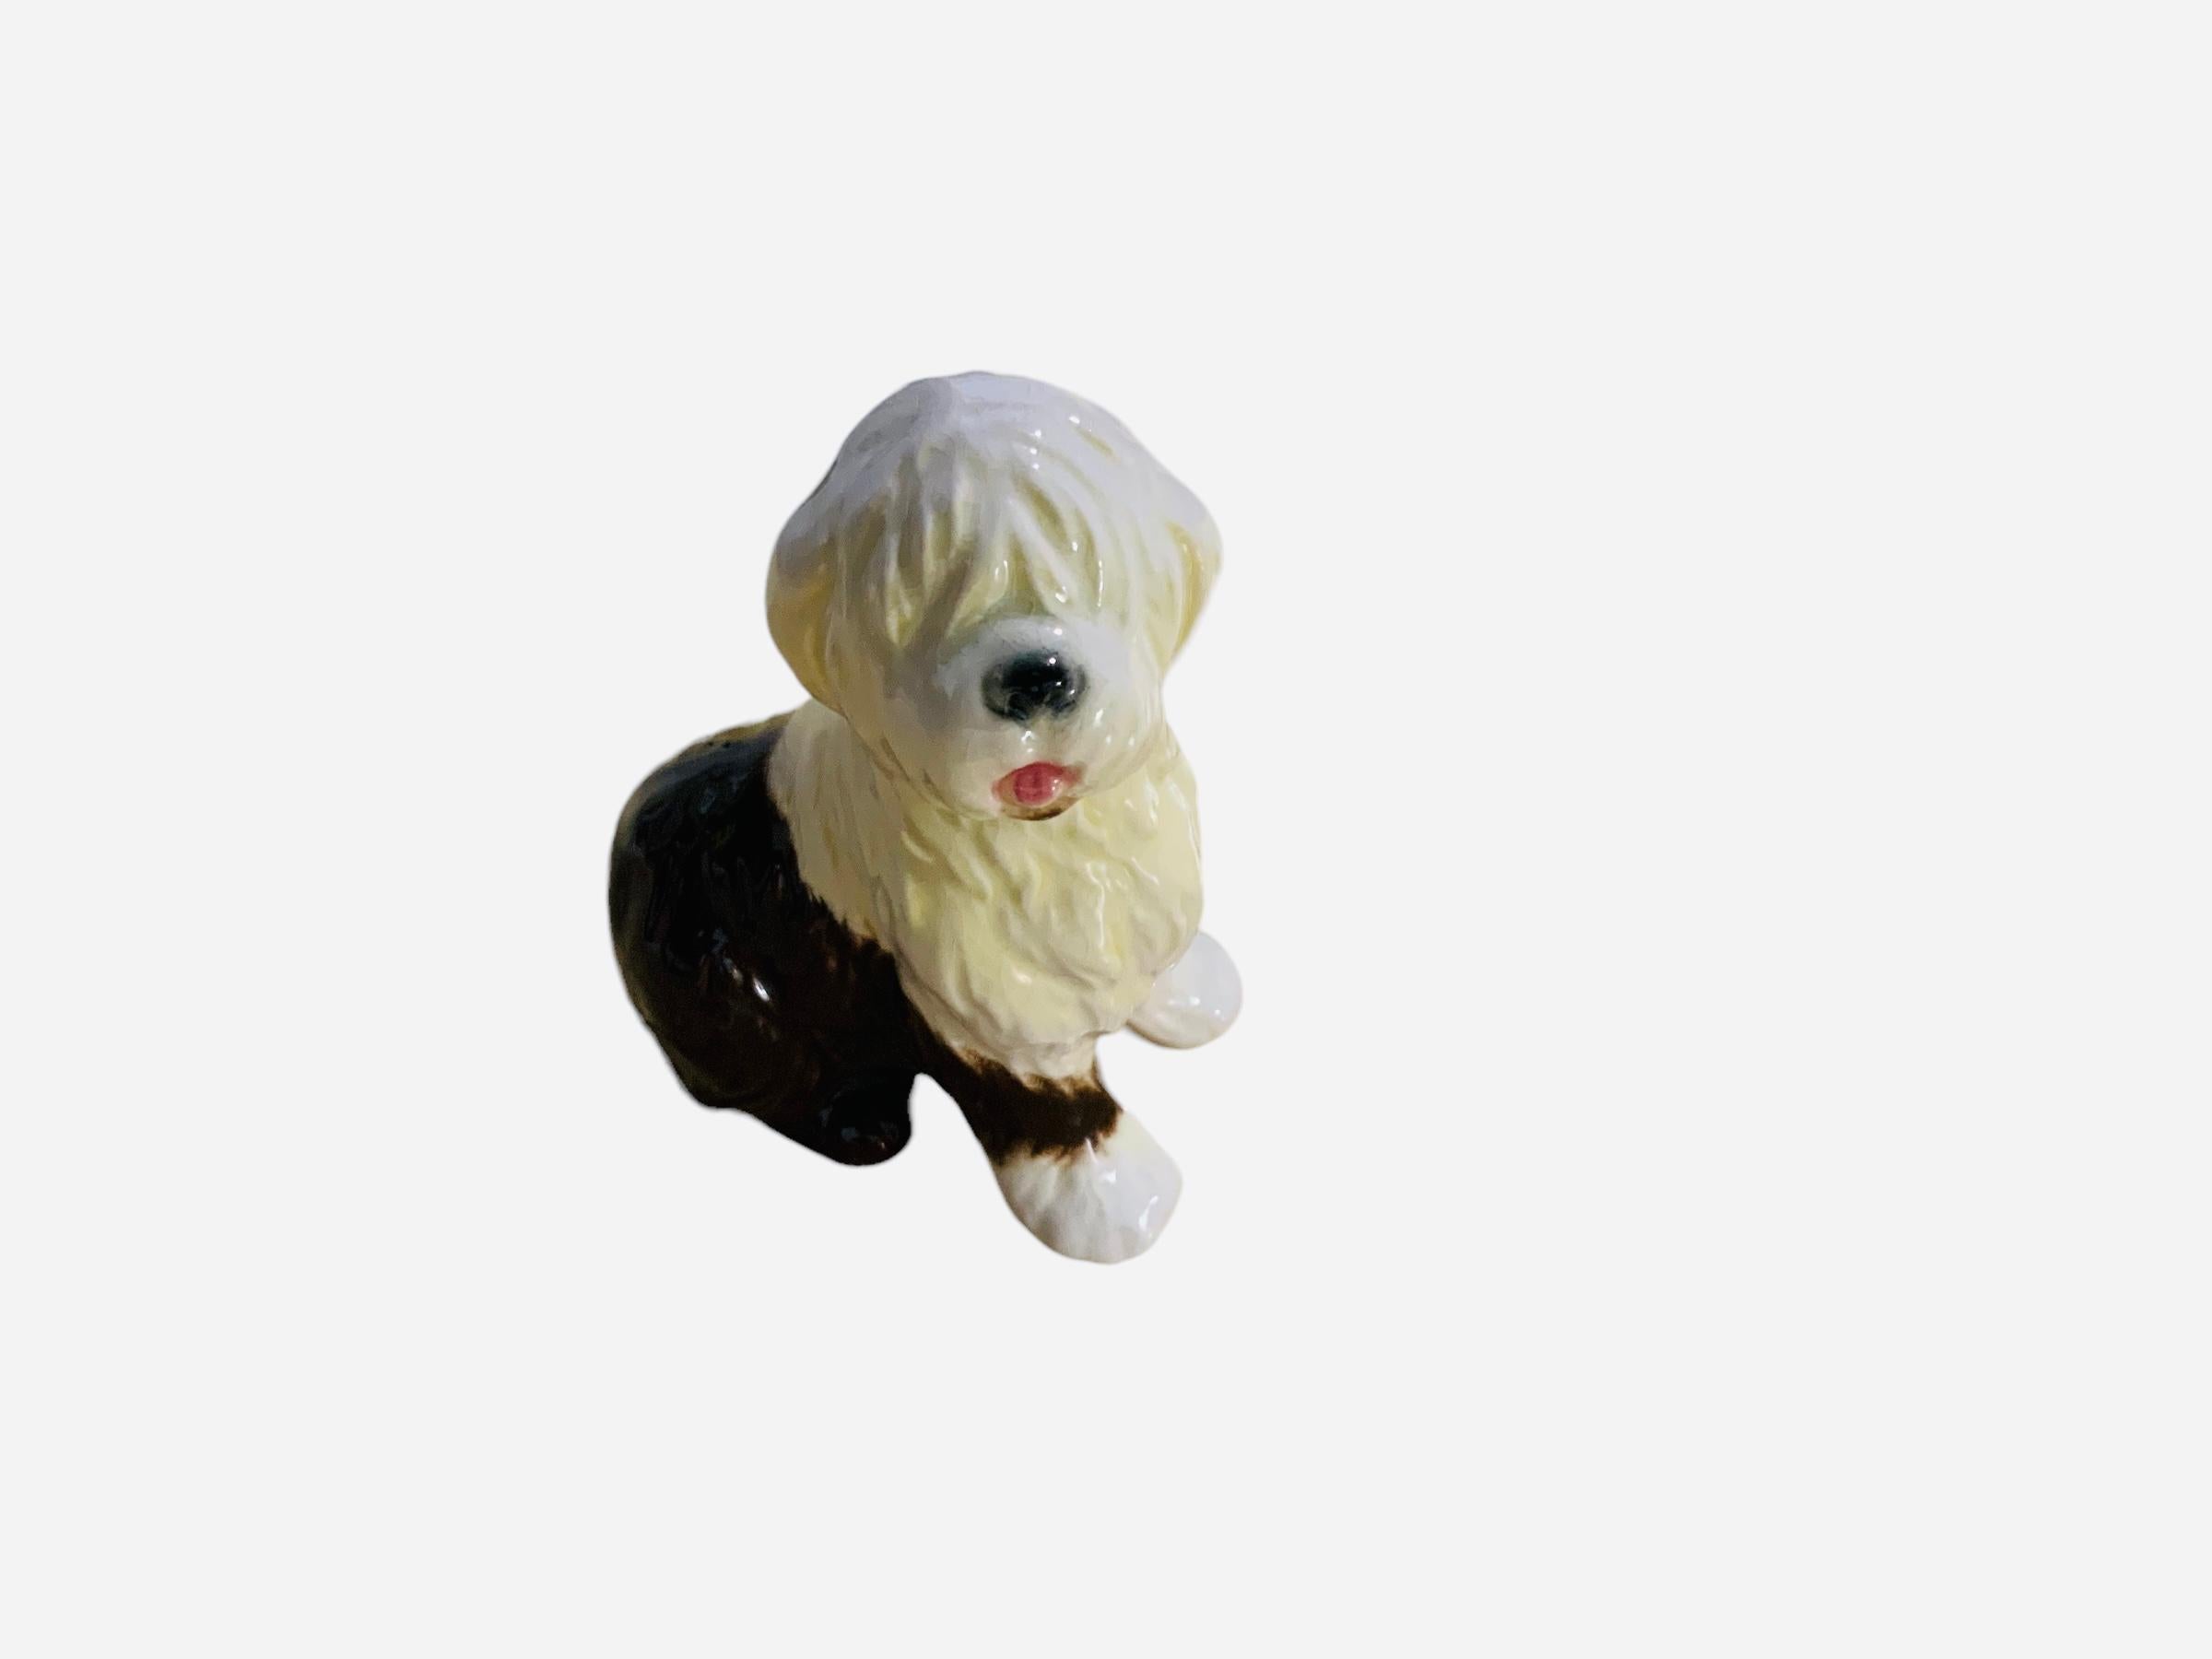 This is a Goeble porcelain figurine of a dog. It depicts a hand painted adorable Old English Sheep dog standing up and full of white and dark brown hair. The Goeble hallmark is below the figurine.